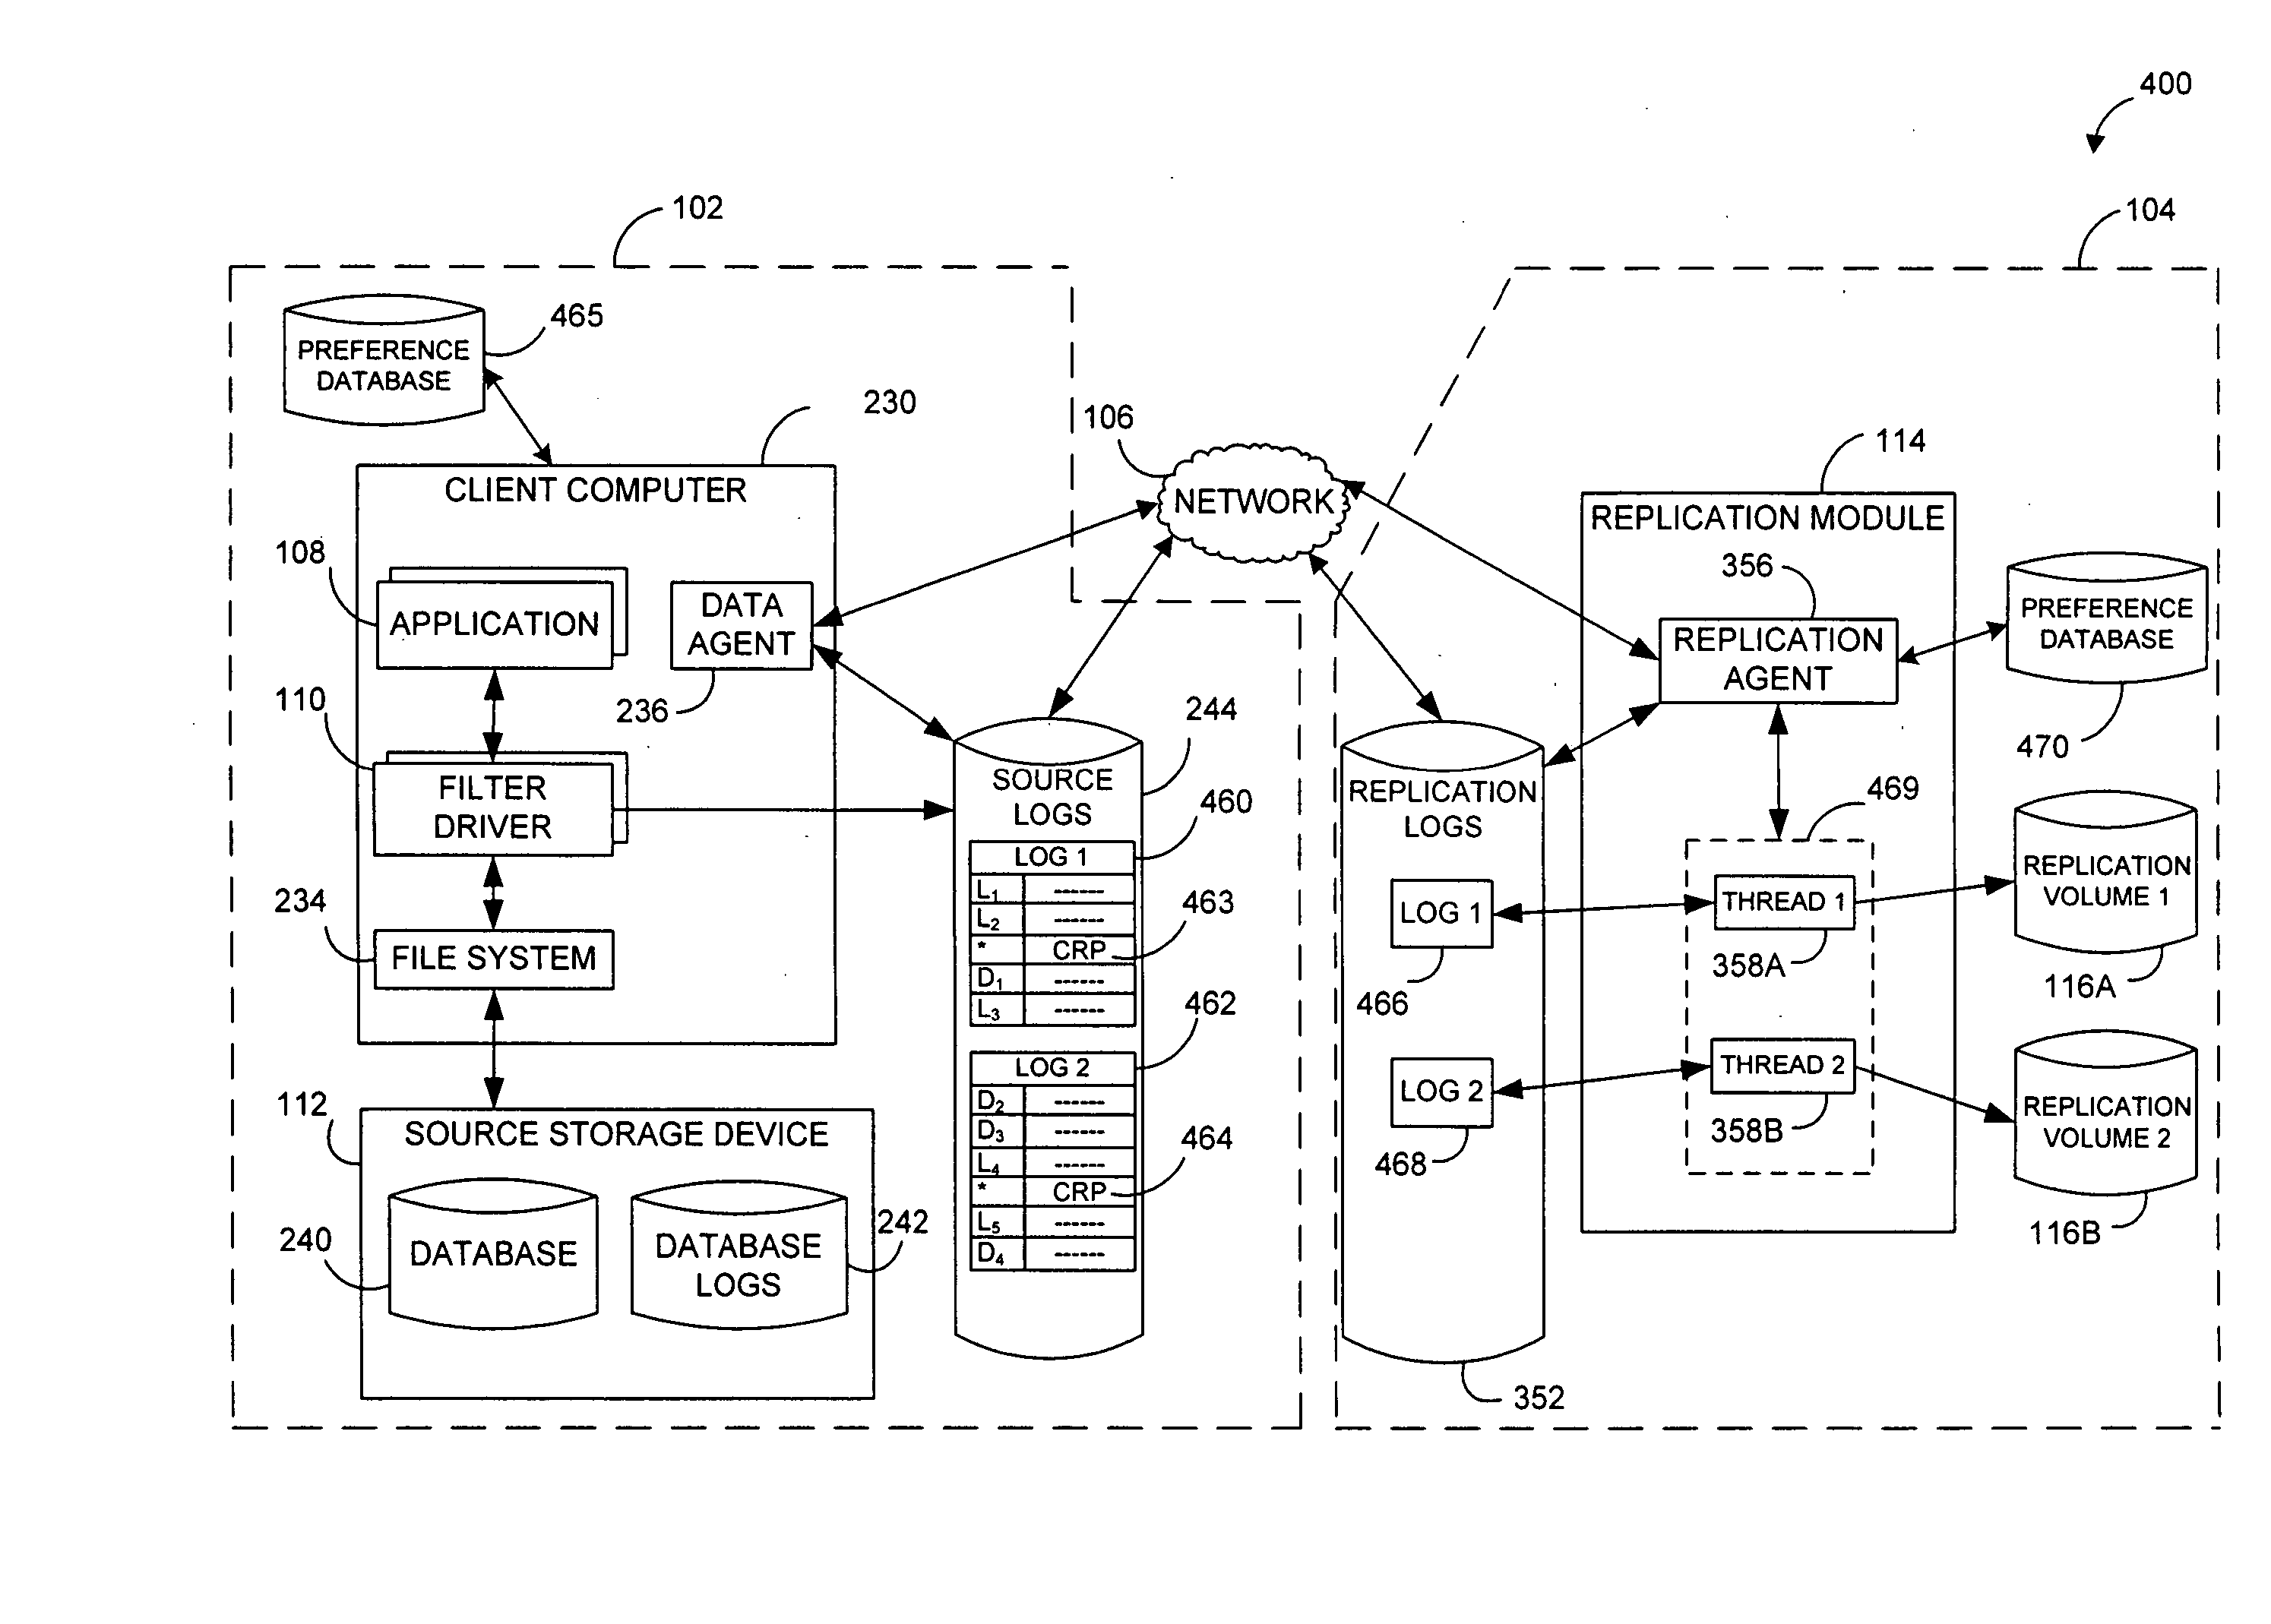 Rolling cache configuration for a data replication system